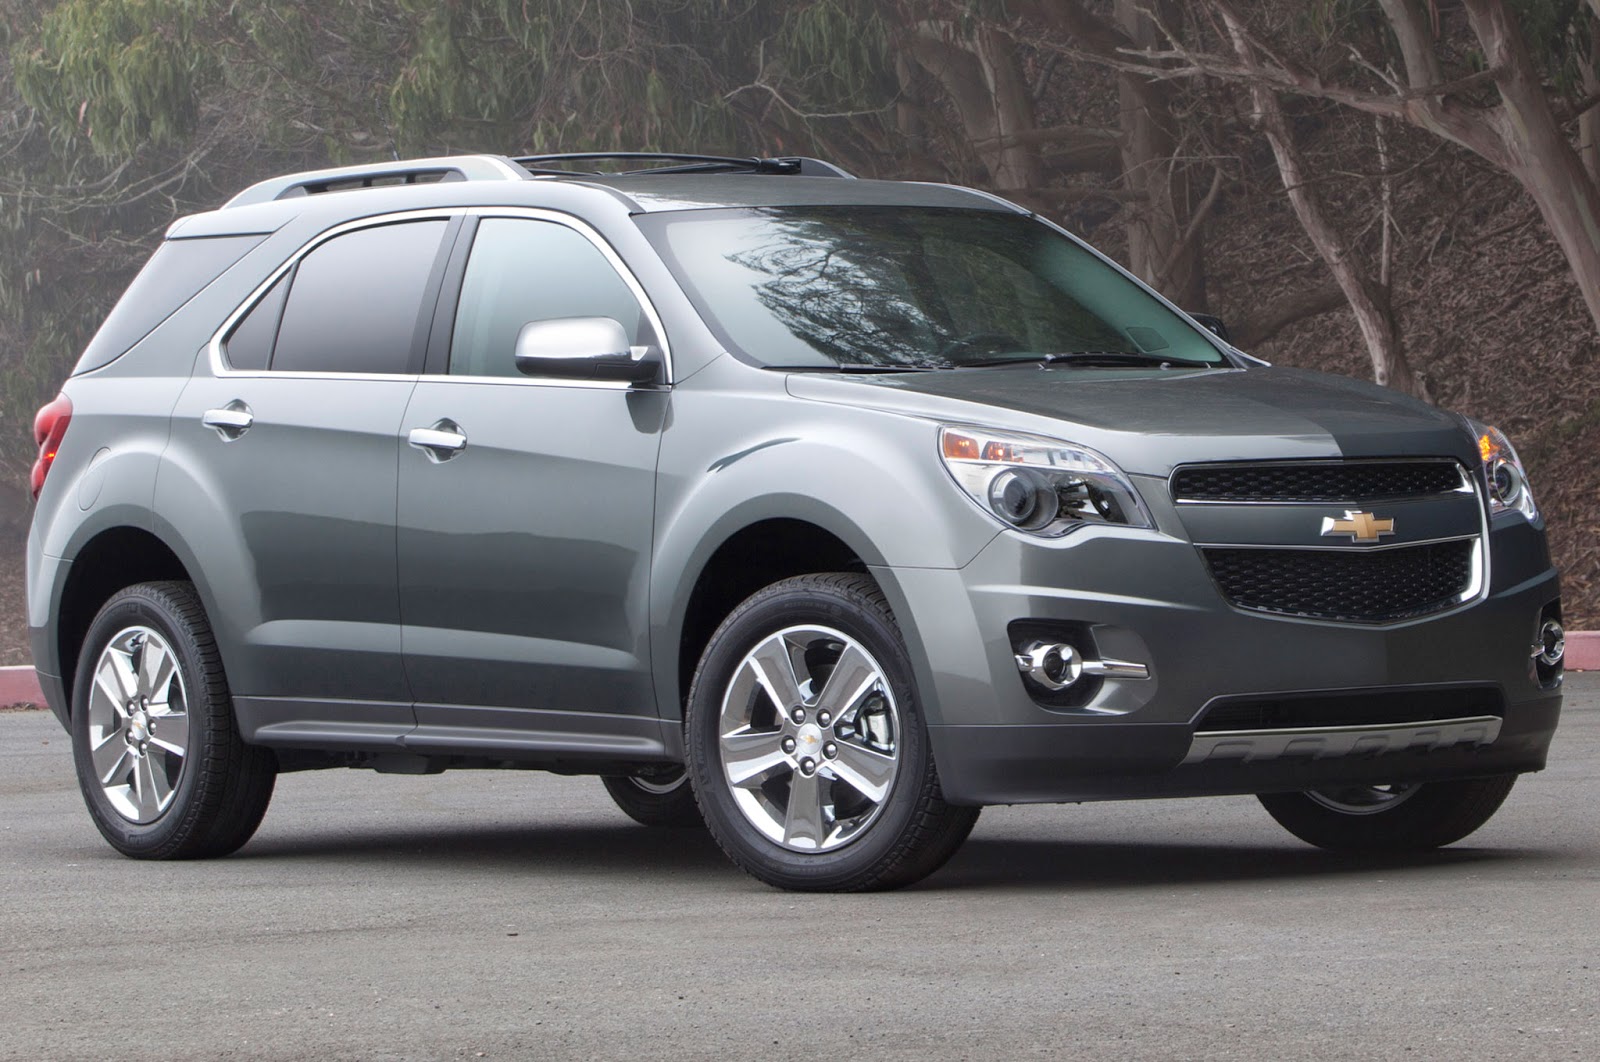 2015 Chevy Equinox | Top Cars